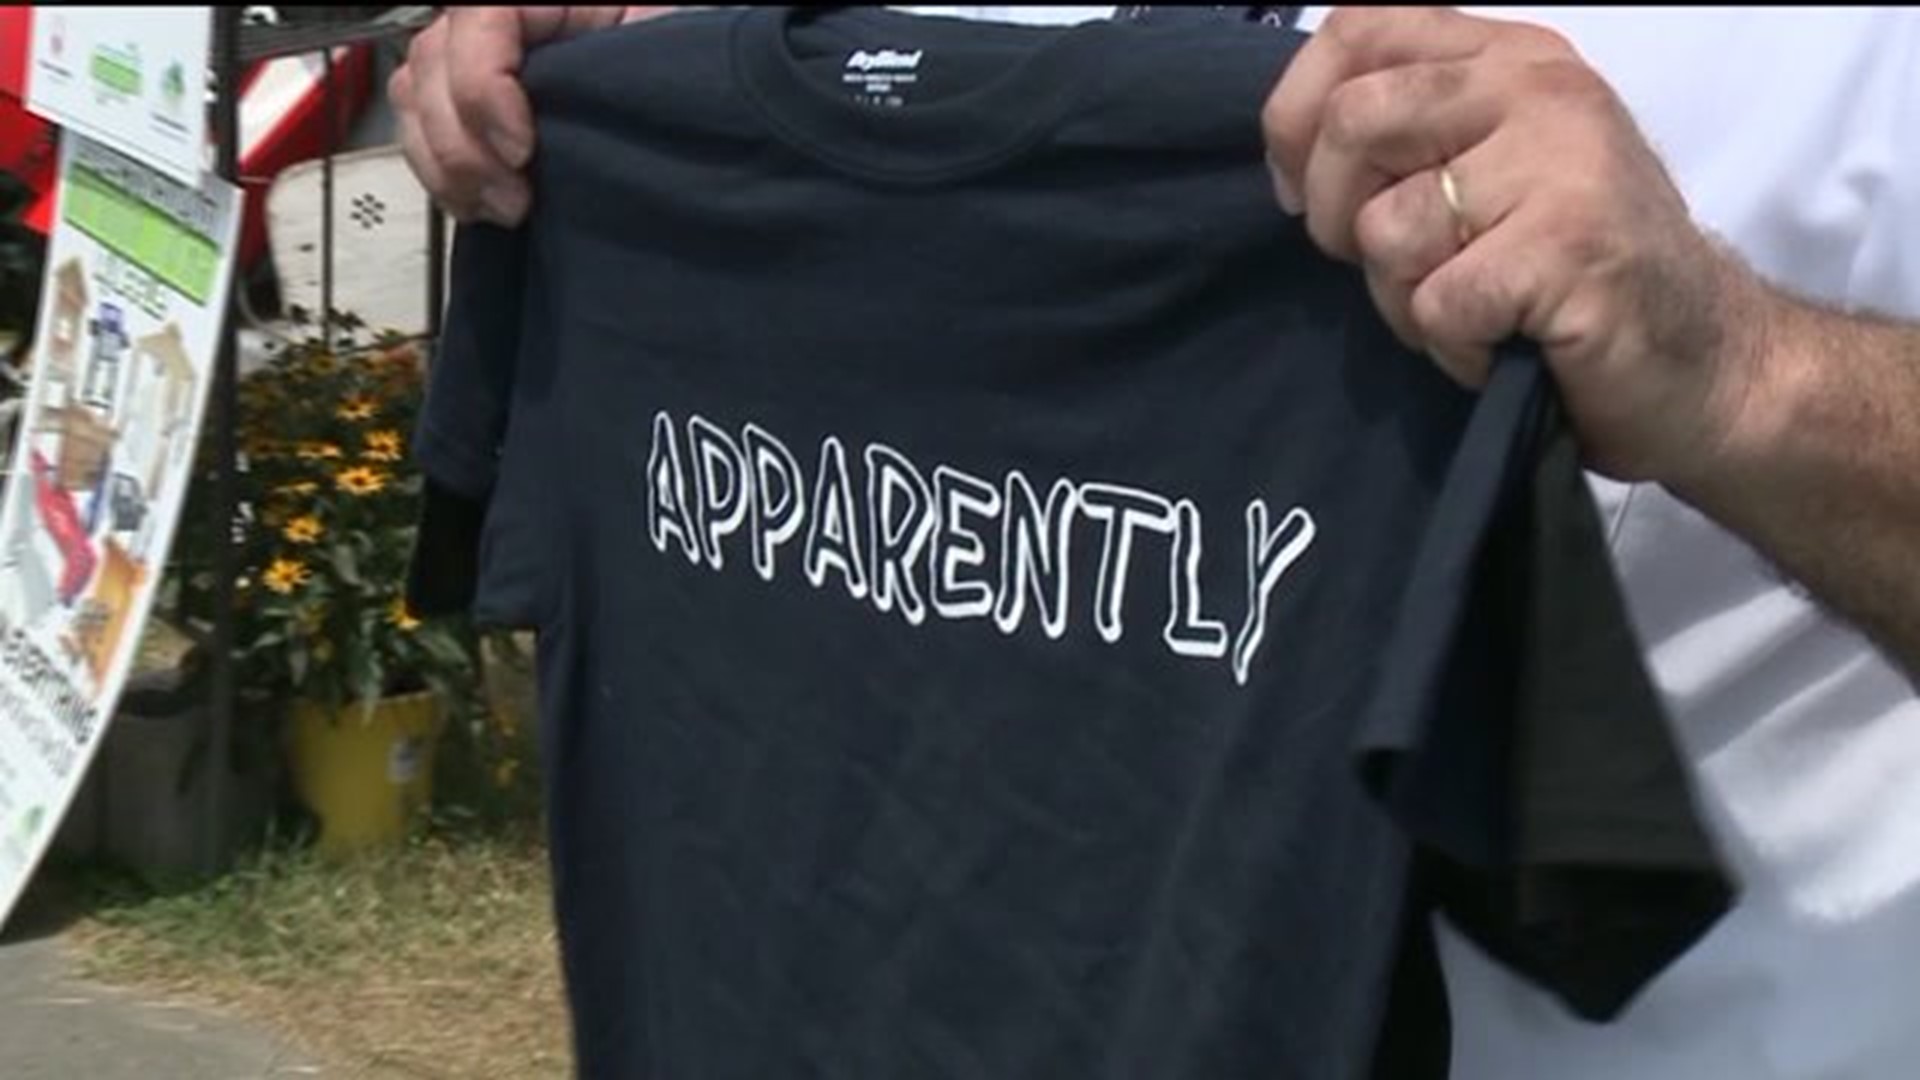 "Apparently Apparel" for a Good Cause